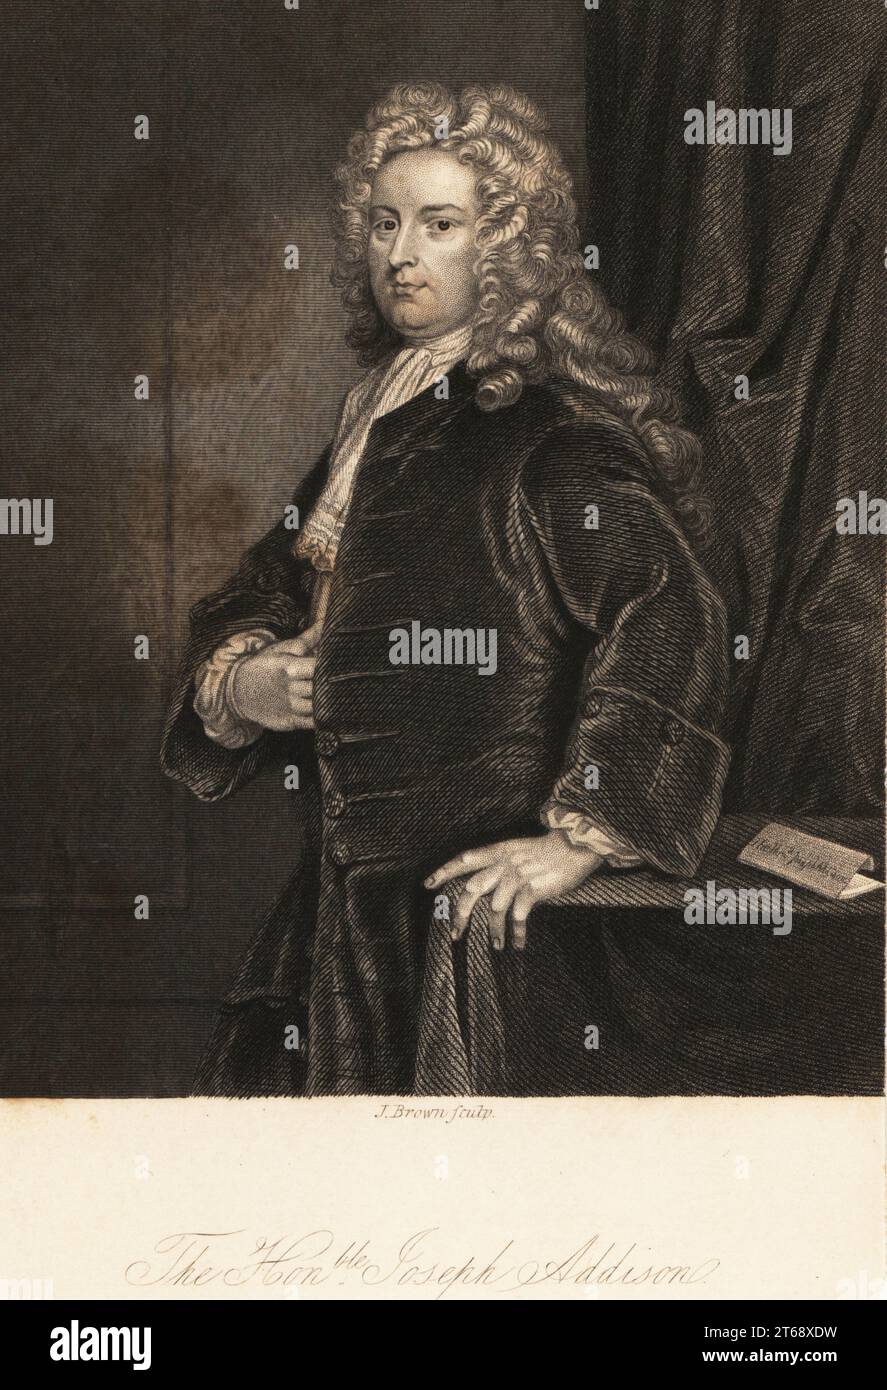 Portrait of the Honourable Joseph Addison, 1672-1719, English essayist, poet, playwright and politician. Steel engraving by J. Brown after a portrait by Sir Godfrey Kneller from The Life of Joseph Addison by Lucy Aikin, London, 1843. Stock Photo